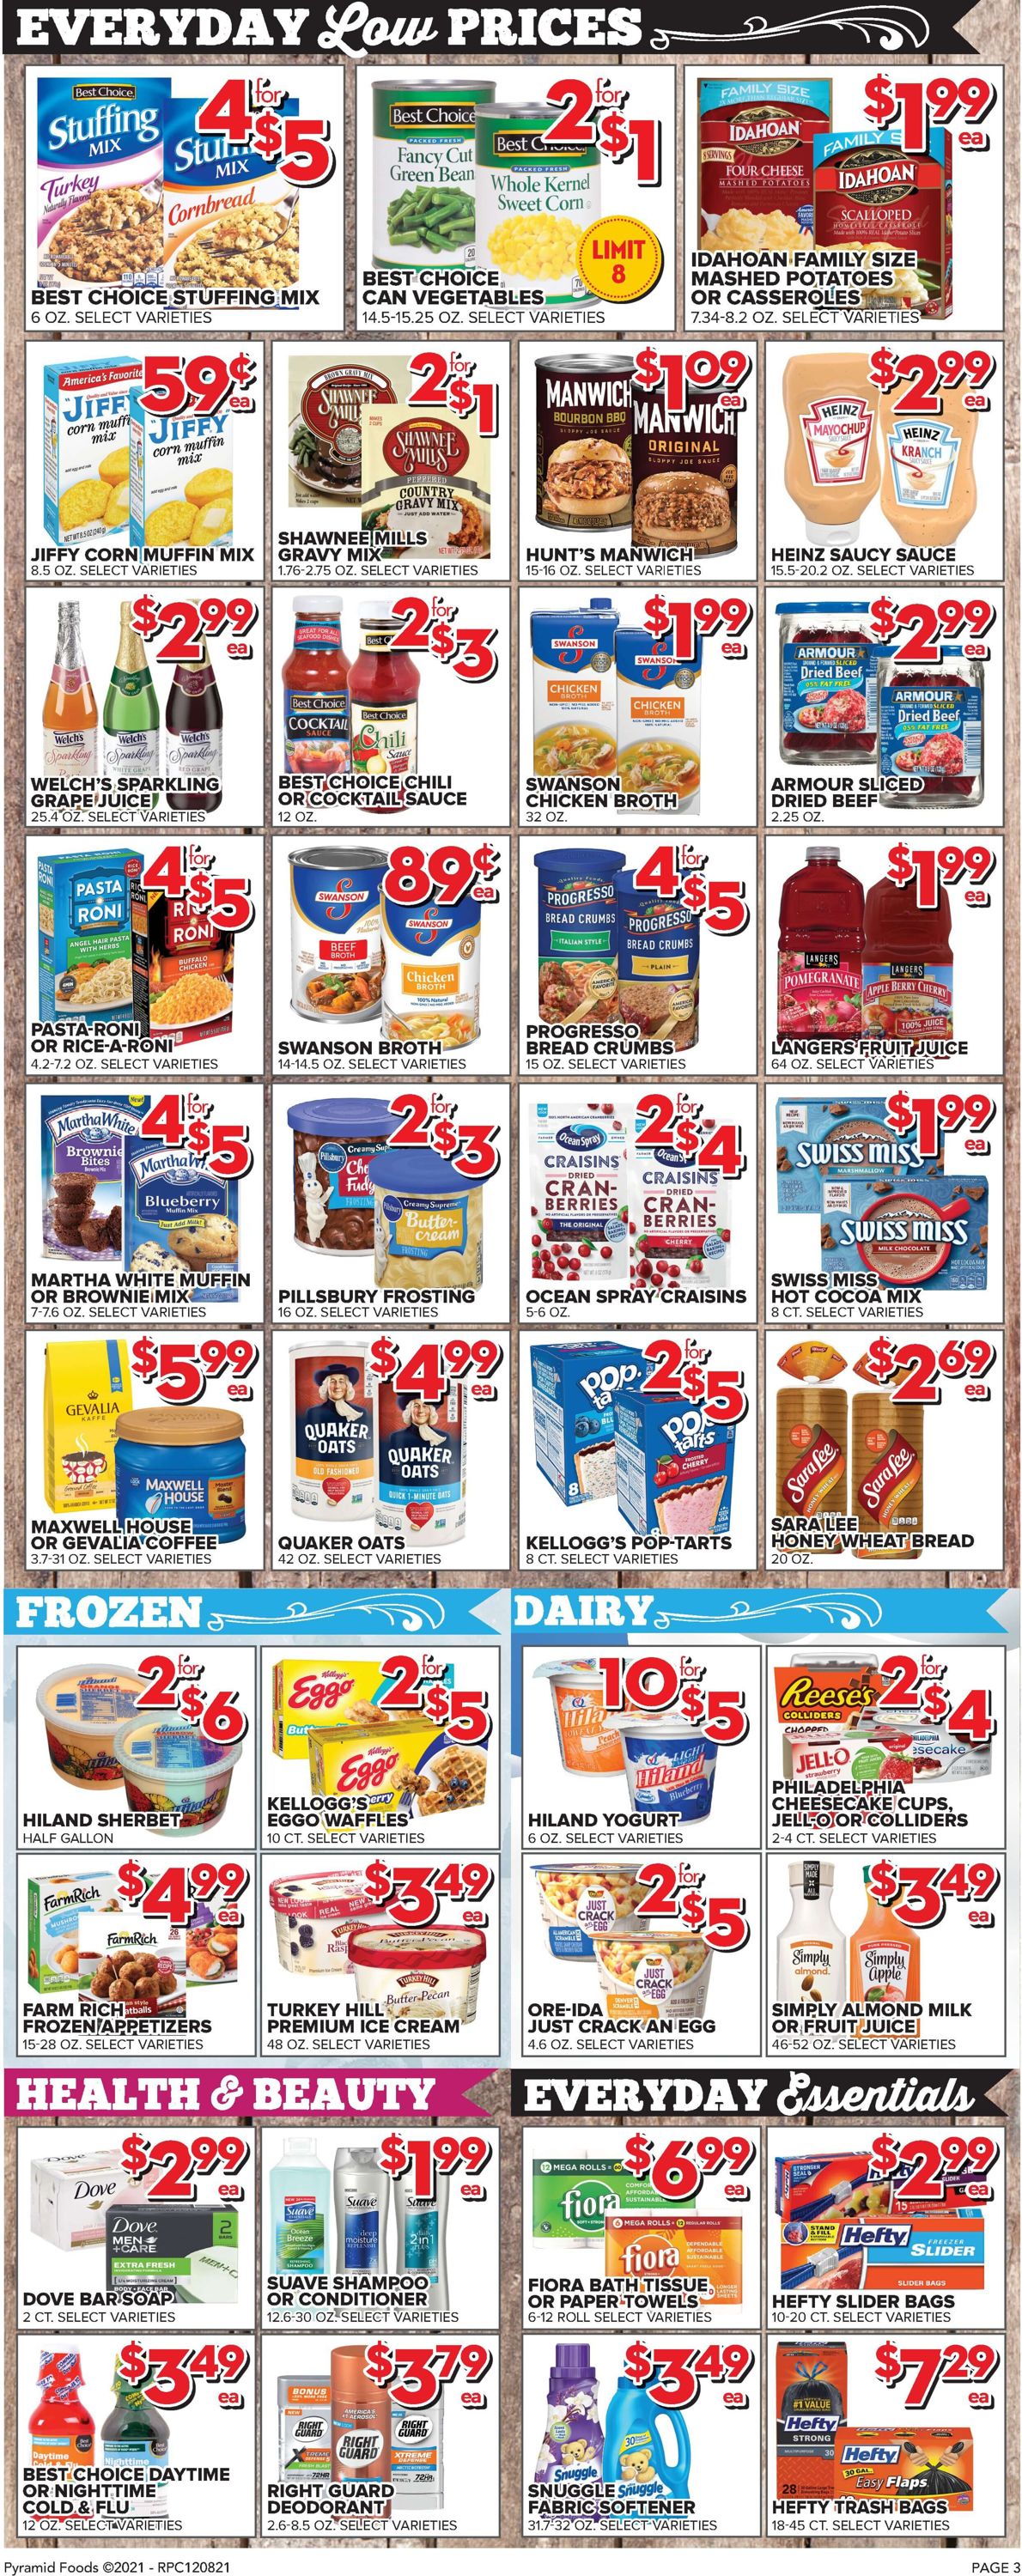 Price Cutter - HOLIDAY 2021 Weekly Ad Circular - valid 12/08-12/14/2021 (Page 3)